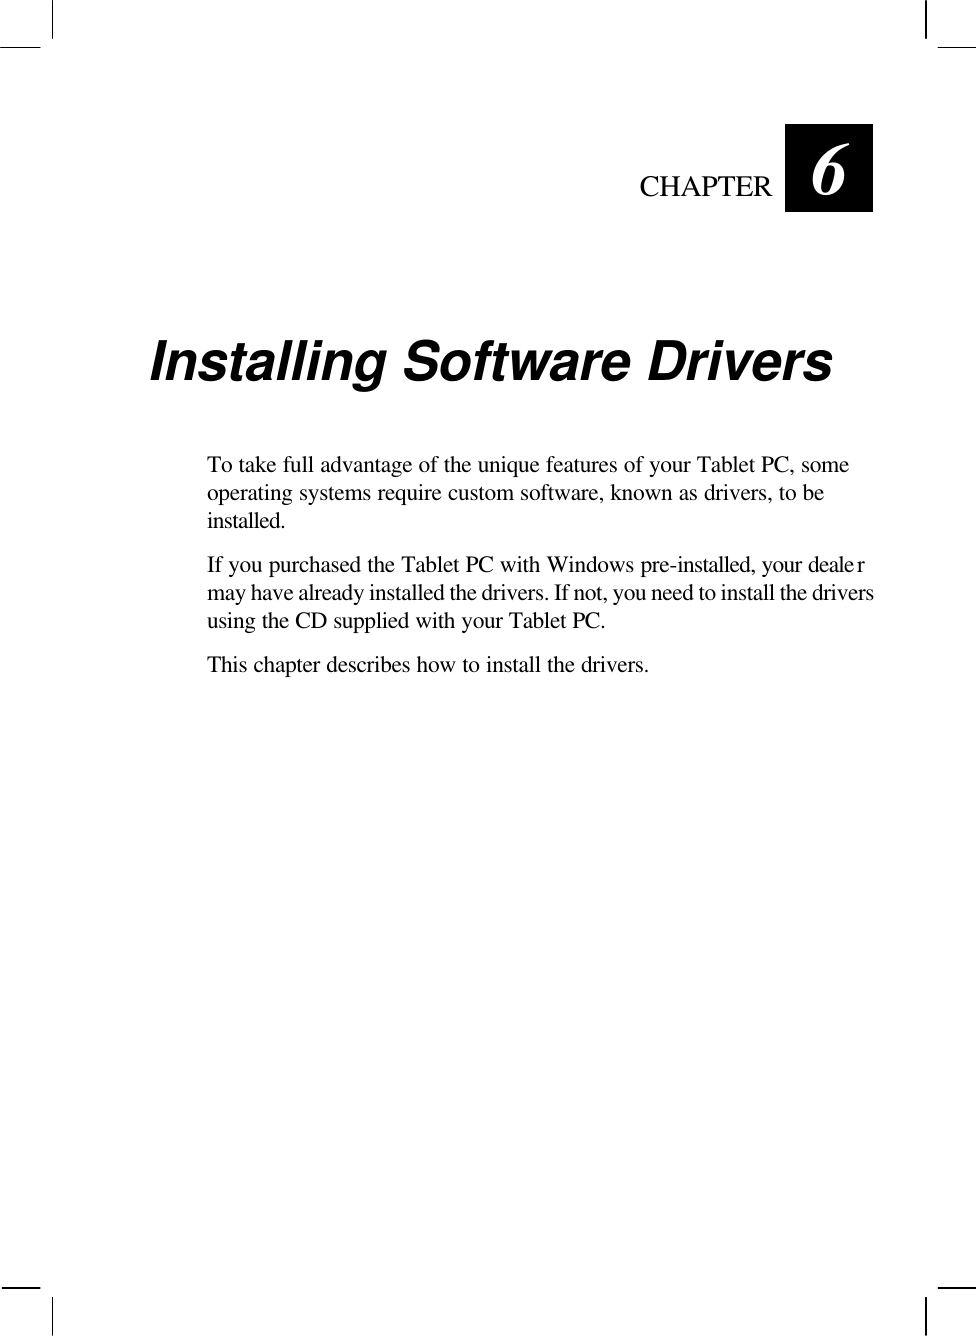   CHAPTER 6 Installing Software Drivers To take full advantage of the unique features of your Tablet PC, some operating systems require custom software, known as drivers, to be installed. If you purchased the Tablet PC with Windows pre-installed, your dealer may have already installed the drivers. If not, you need to install the drivers using the CD supplied with your Tablet PC. This chapter describes how to install the drivers.   